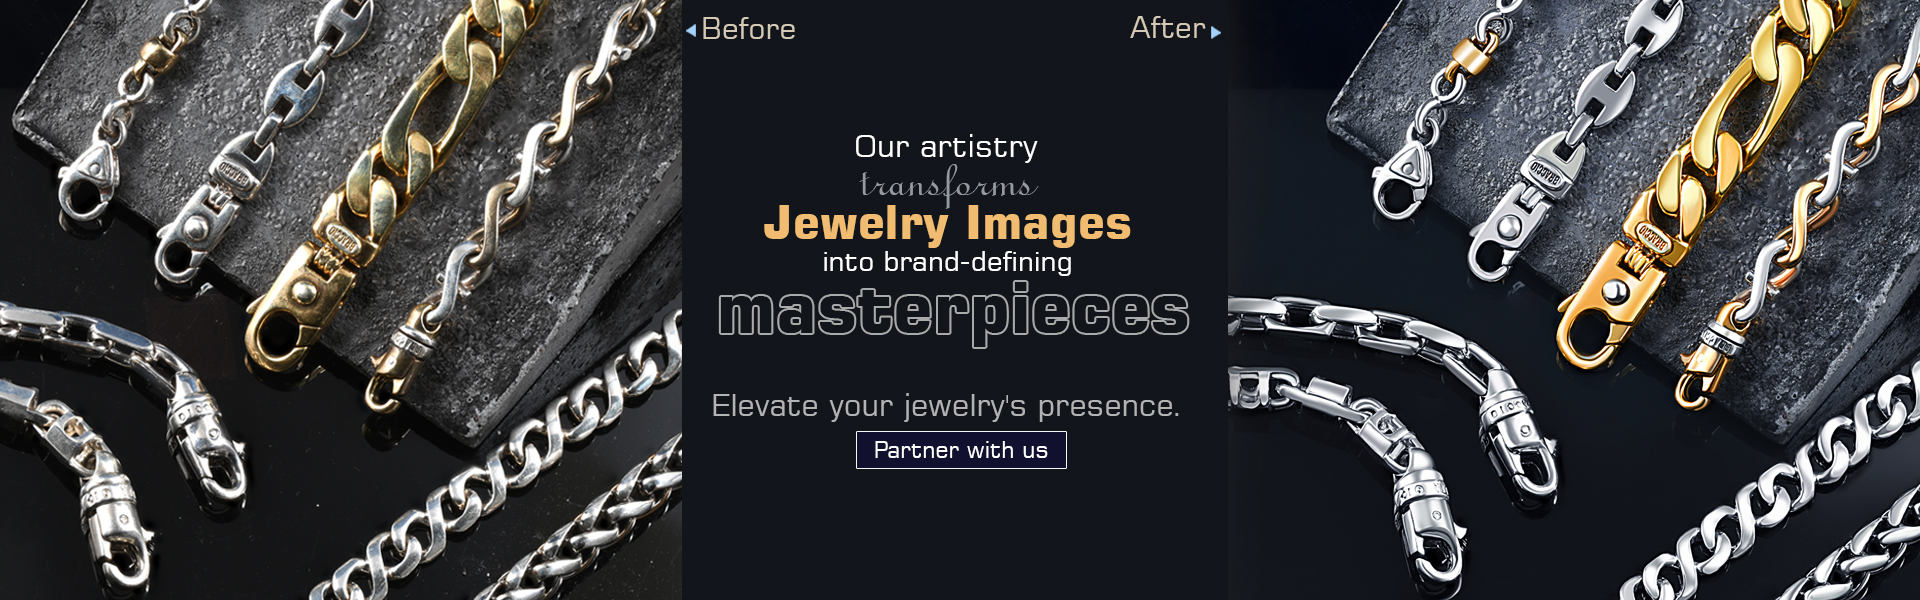 Best Jewelry Retouching Company in India